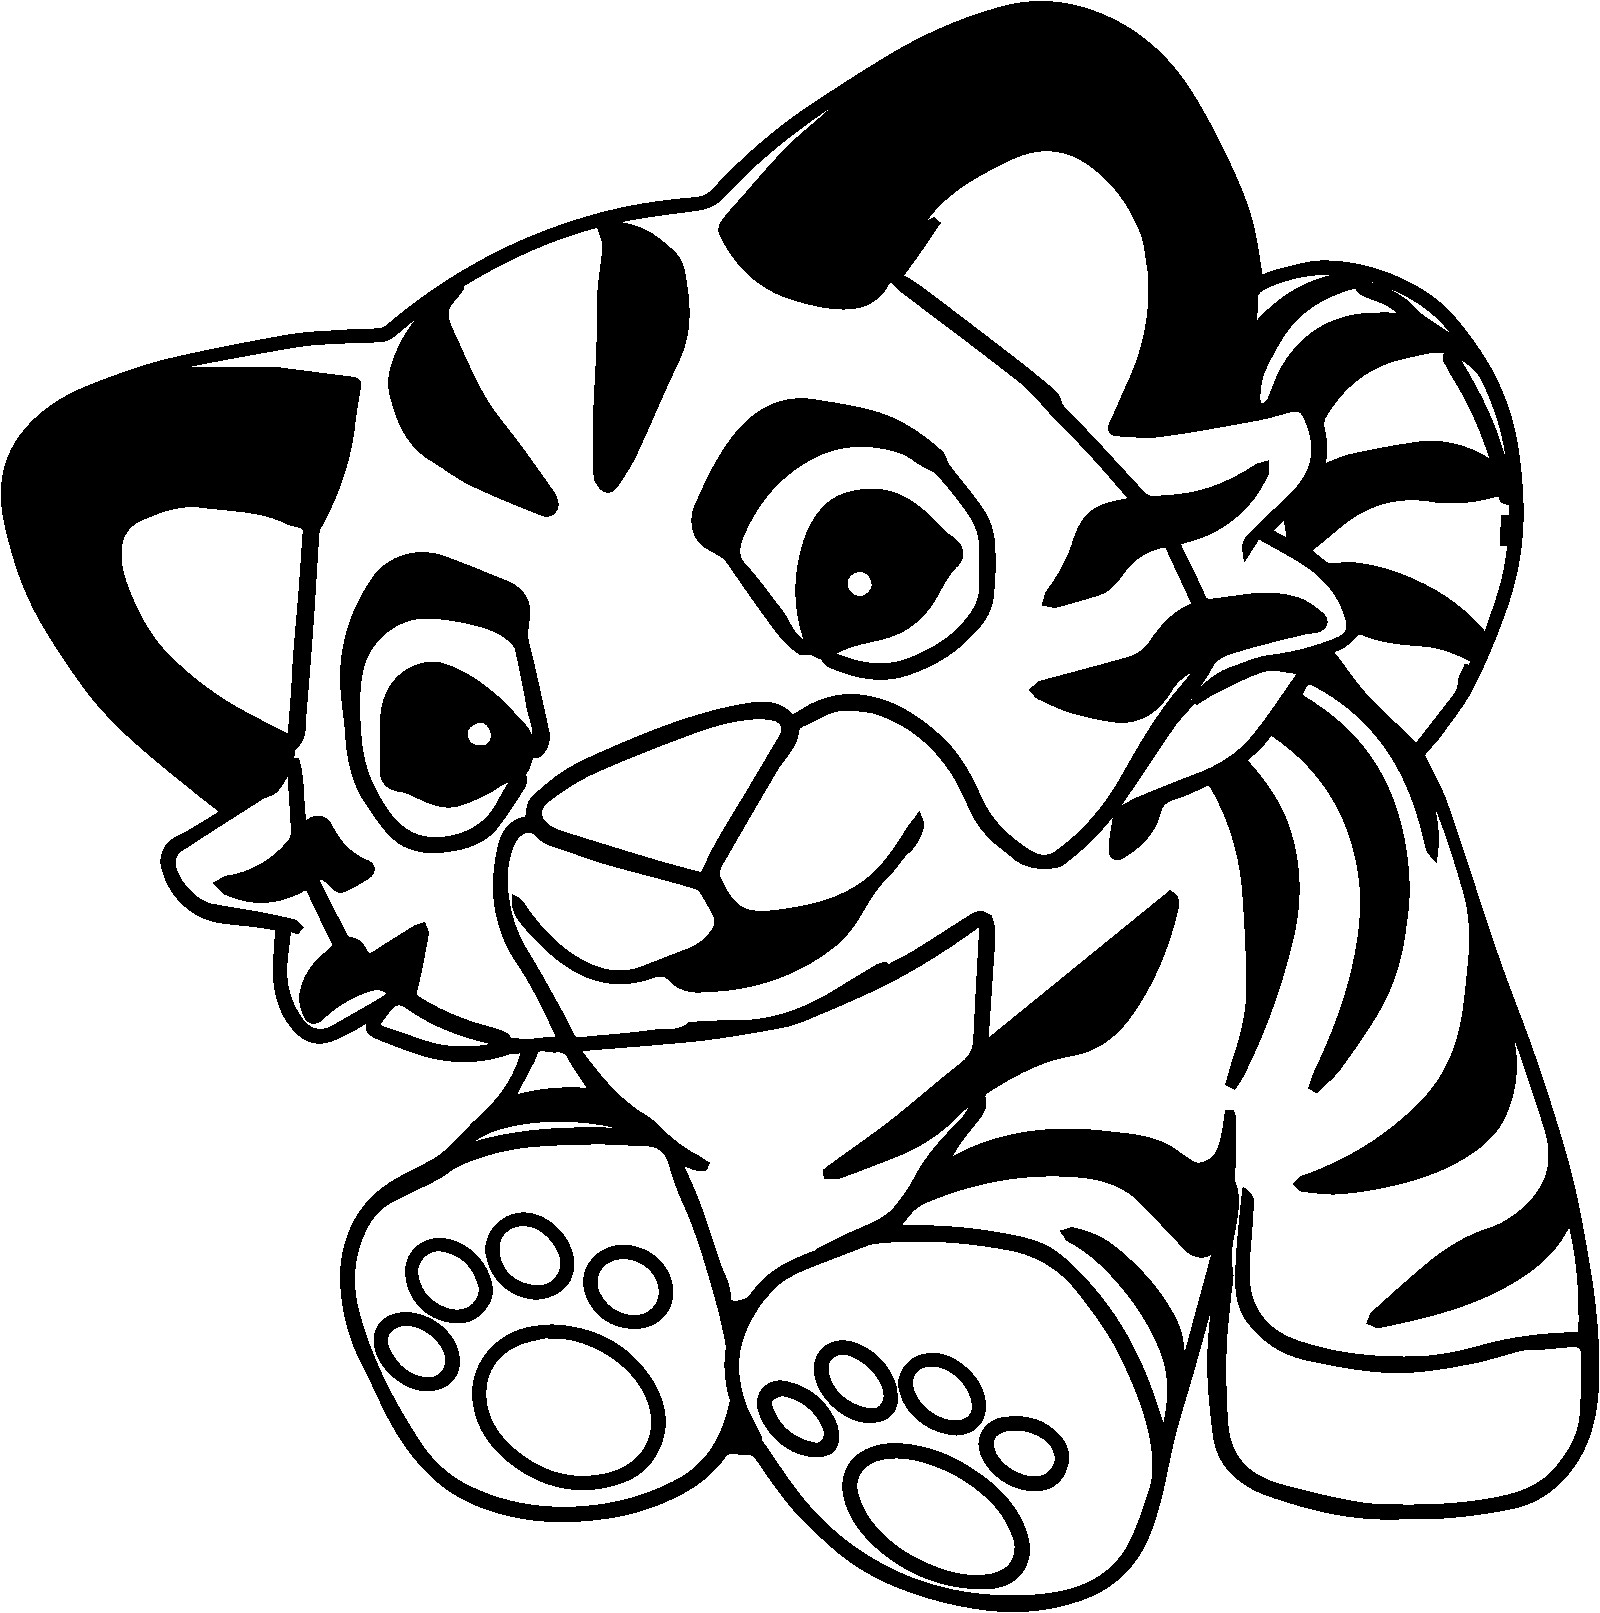 Baby Tiger Coloring Pages
 Walking Baby Tiger Coloring Page